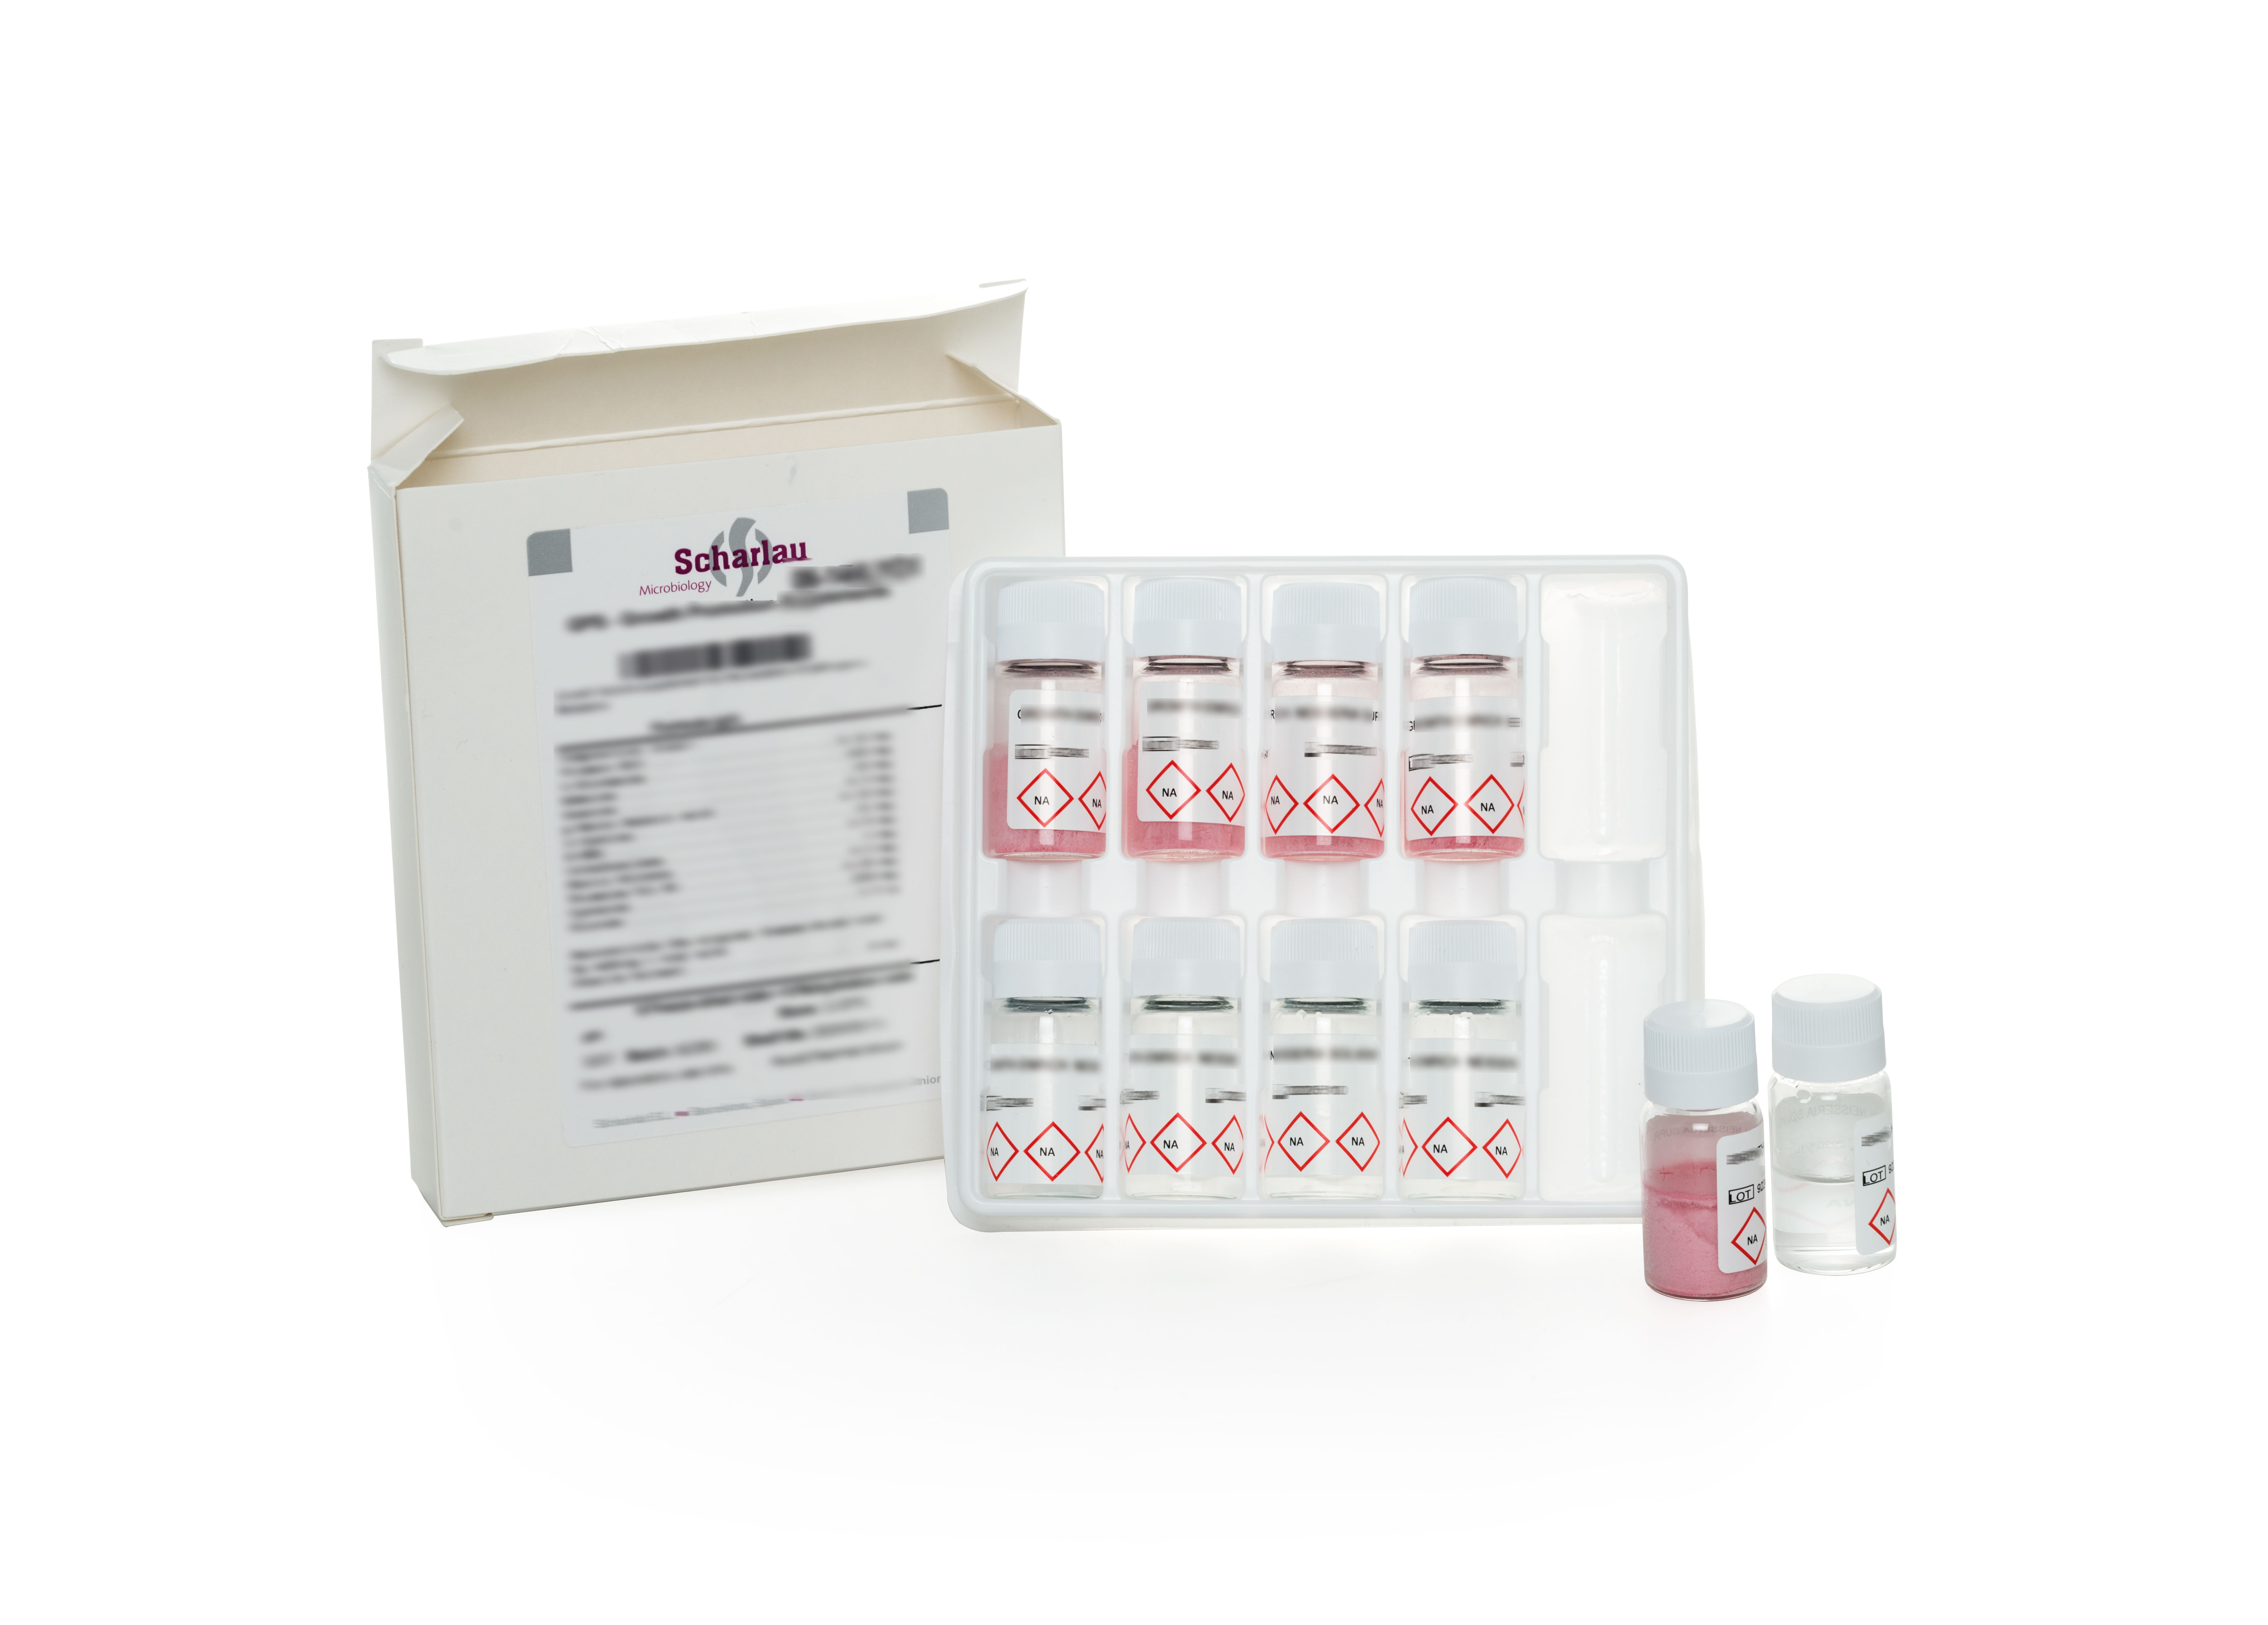 Ampicillin Selective Supplement. Sterile selective supplement used for Aeromonas spp. isolation from water, food and clinical samples.